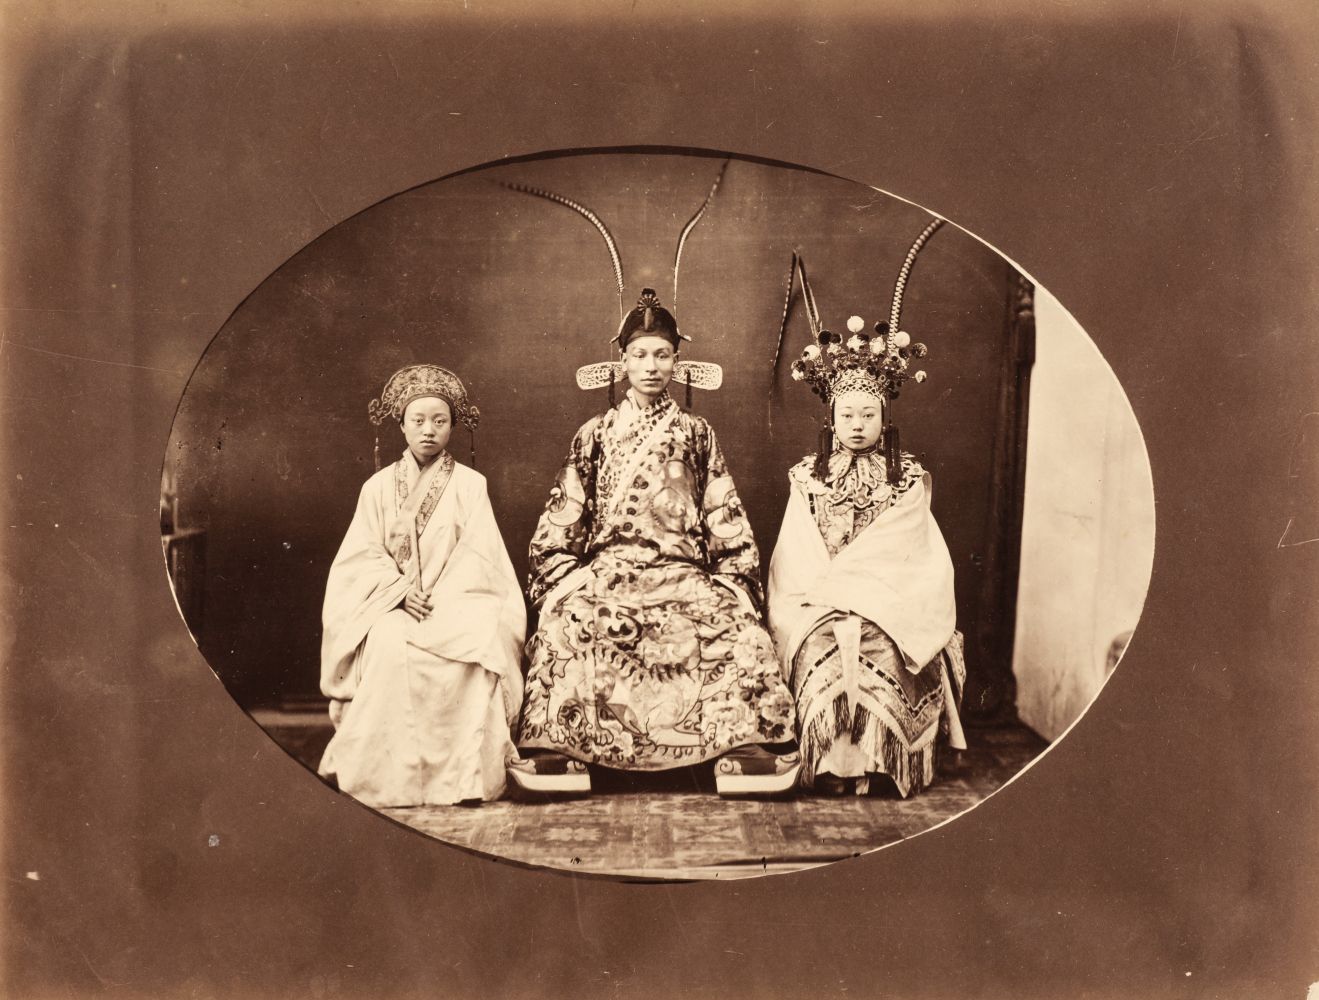 China. Chinese actors, by William Saunders, c. 1870